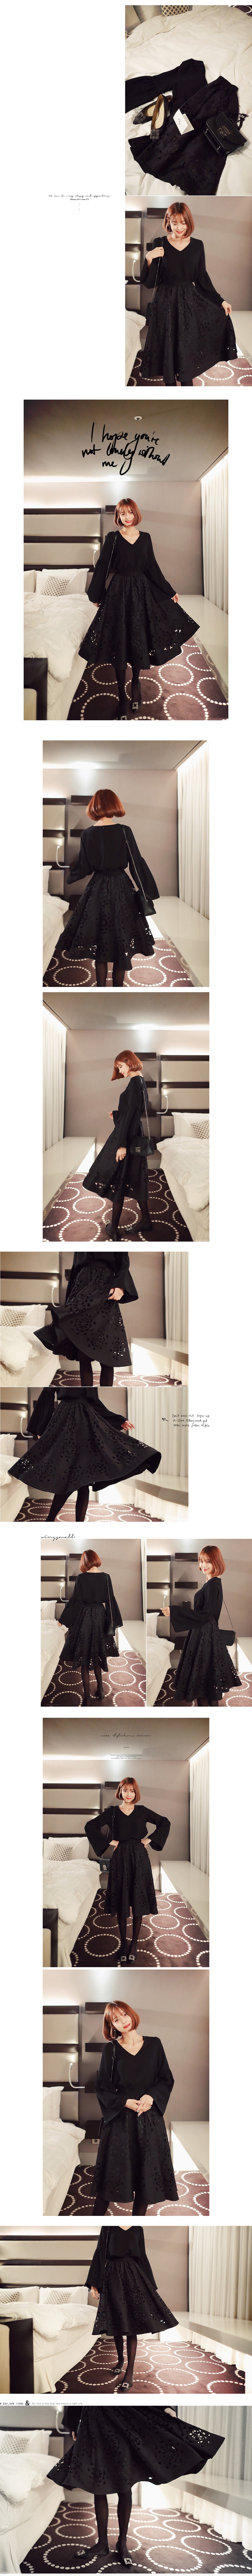 [Autumn New] Punch-Hole Detail Flared Skirt Black One Size(S-M)